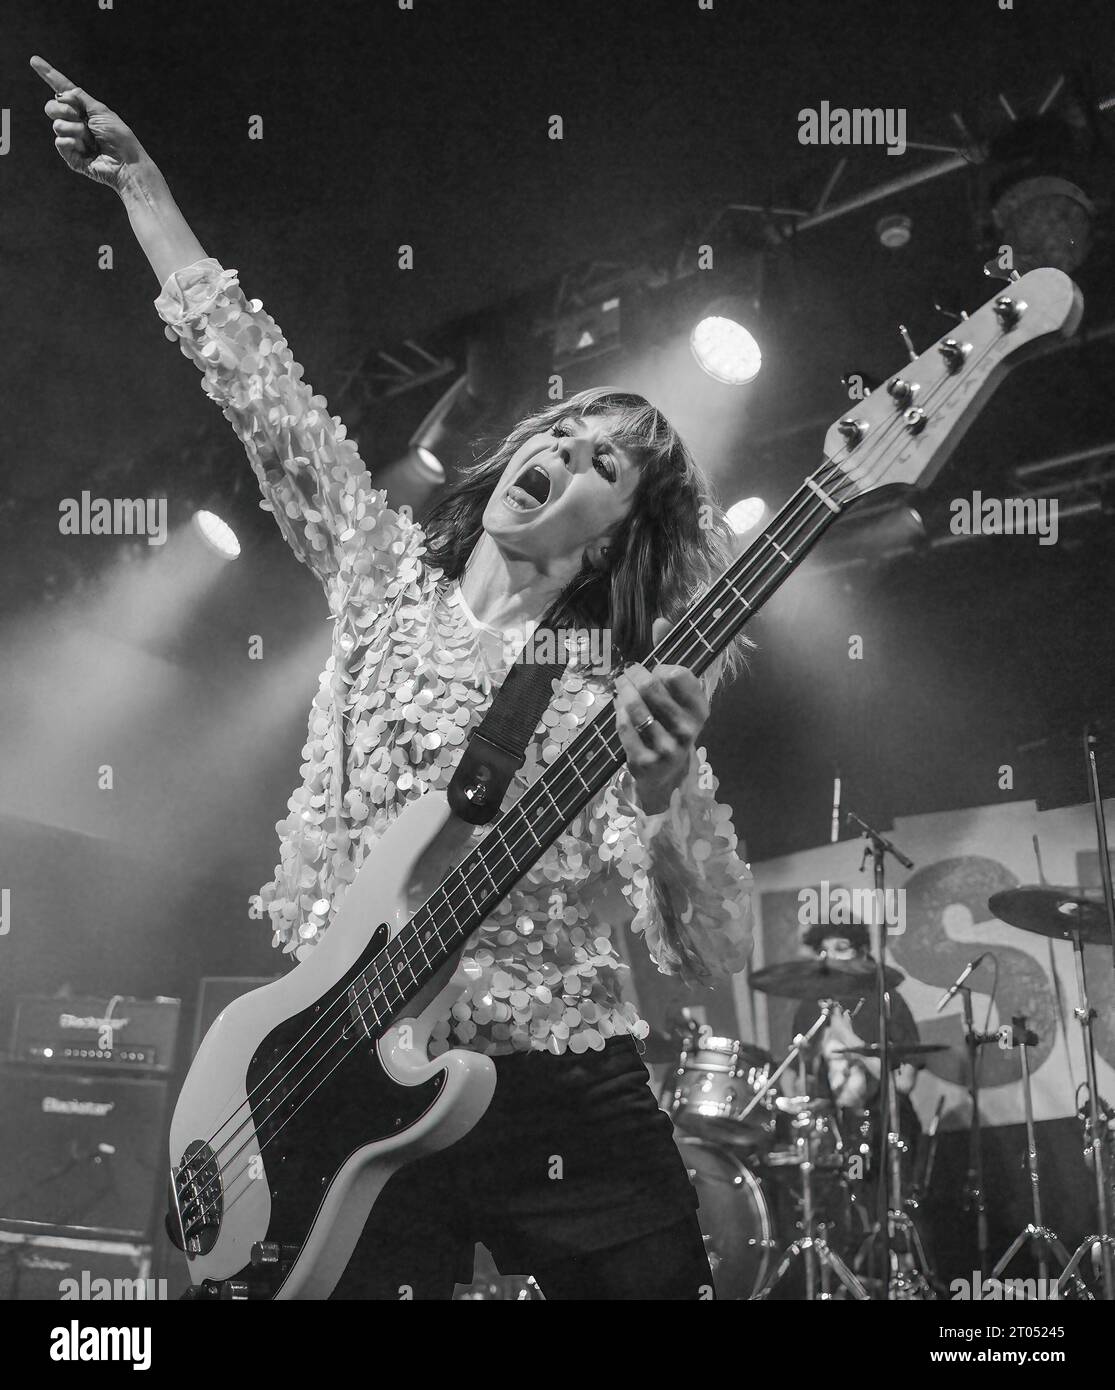 Nottingham, United Kingdom. 3rd October 2023, Event: Rock City. ASH (Headline Act) with support Acts JEALOUS NOSTRIL and SUBWAYS, at PICTURED - Bassist / Lead Singer - Charlotte Cooper (THE SUBWAYS)  Credit:Mark Dunn Photography/Alamy Entertainment Stock Photo